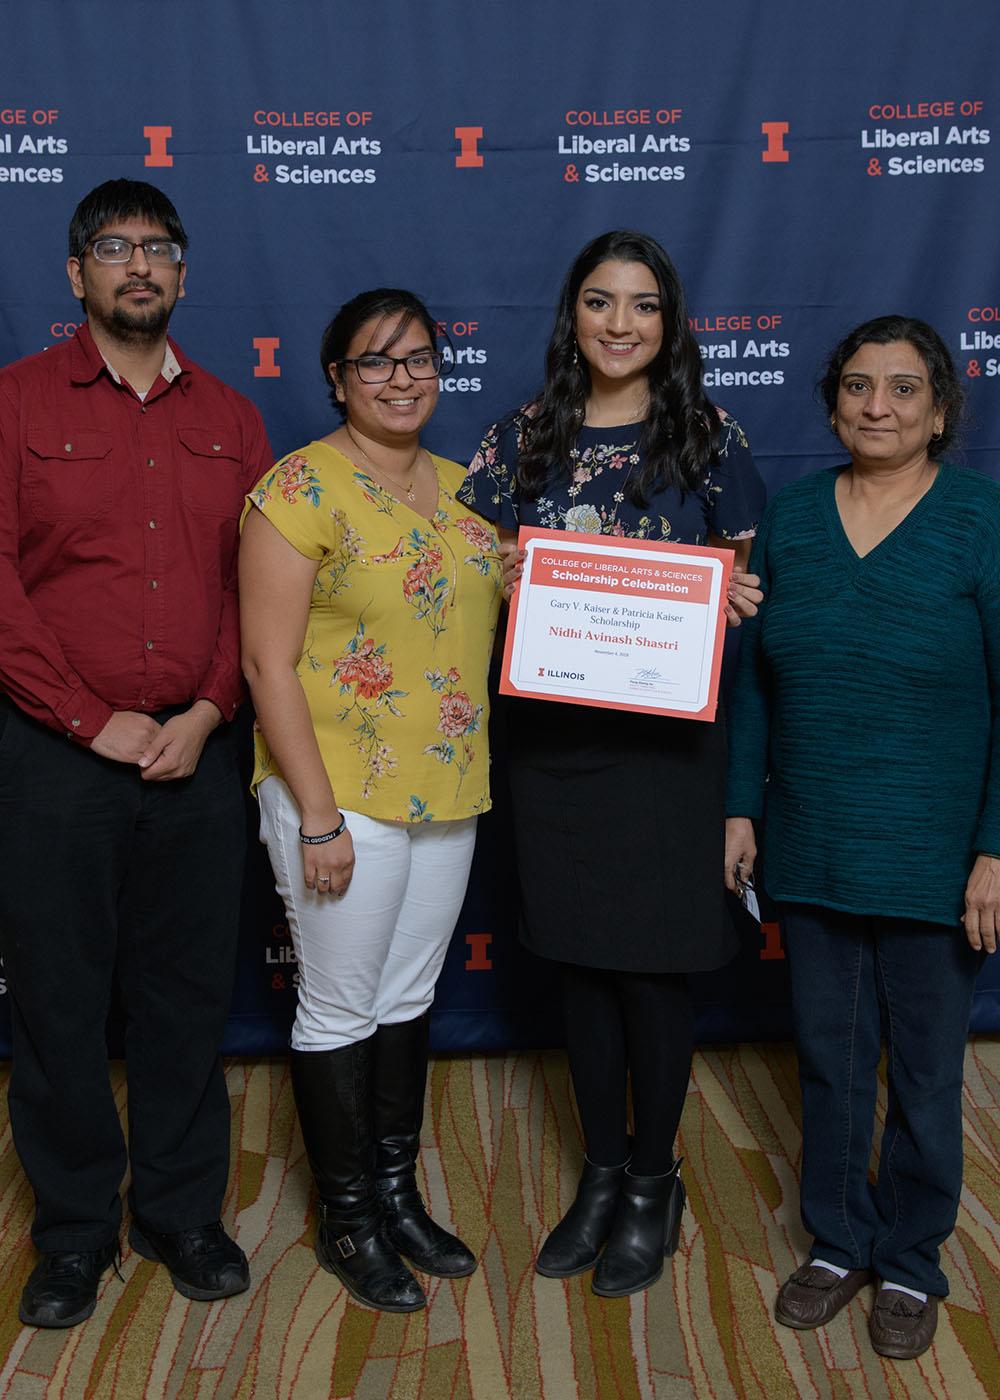 Nidhi Avinash Shastri, a senior, poses at the LAS Scholarship Celebration. She works to help individuals give voice to their ideas on campus and is the recipient of the Gary V. Kaiser and Patricia Kaiser Scholarship. (Della Perrone.) 